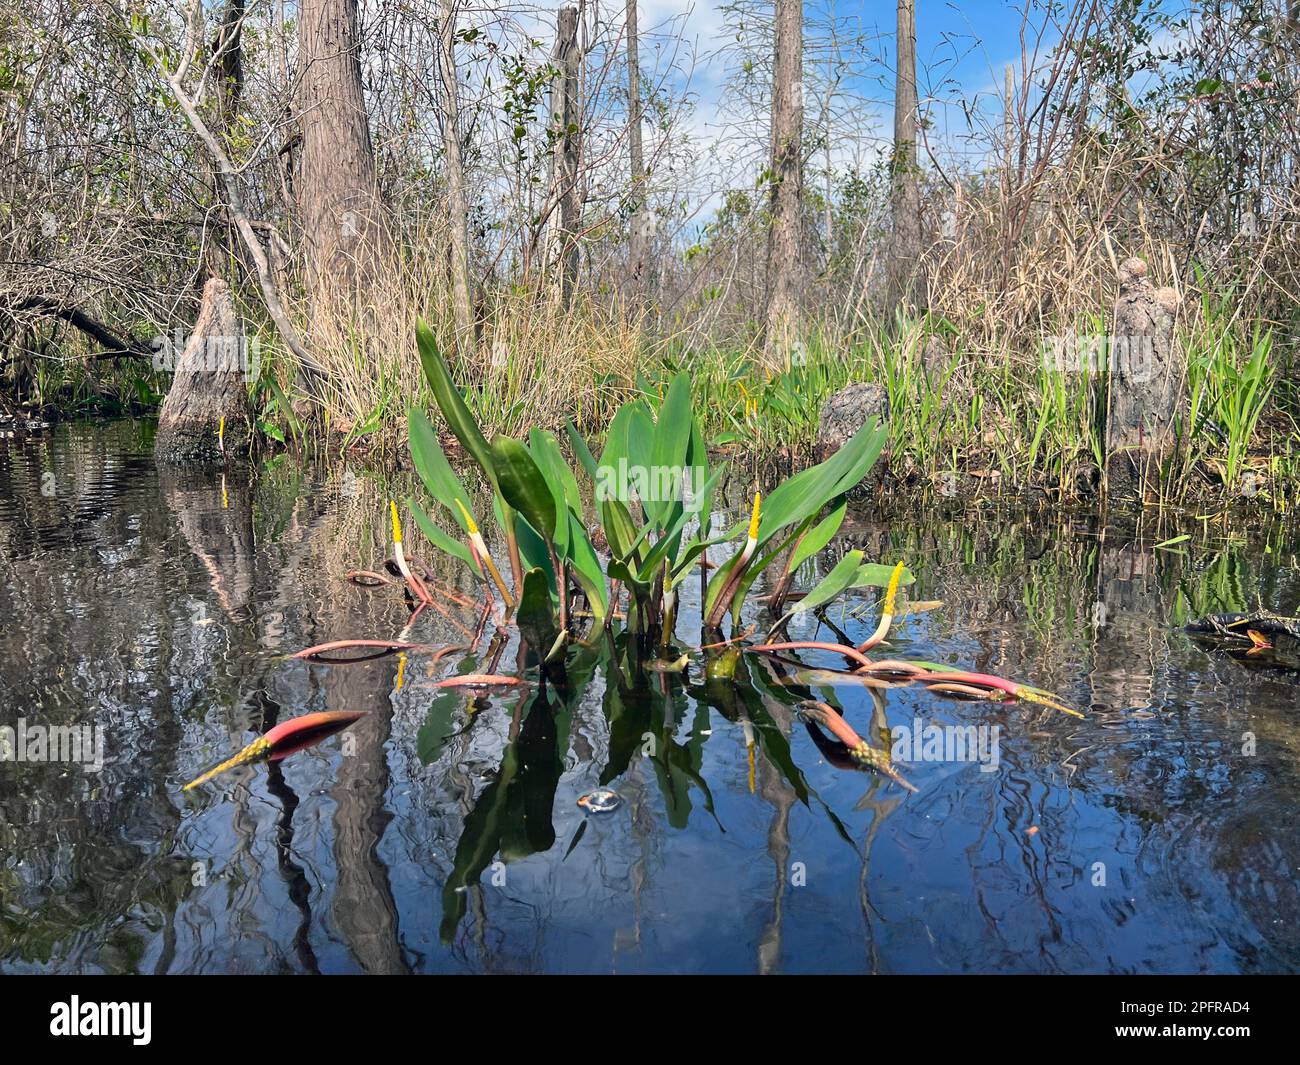 Orontium aquaticum, commonly known as Golden Club, is an aquatic plant frequently within the Okefenokee National Wildlife Refuge. Stock Photo